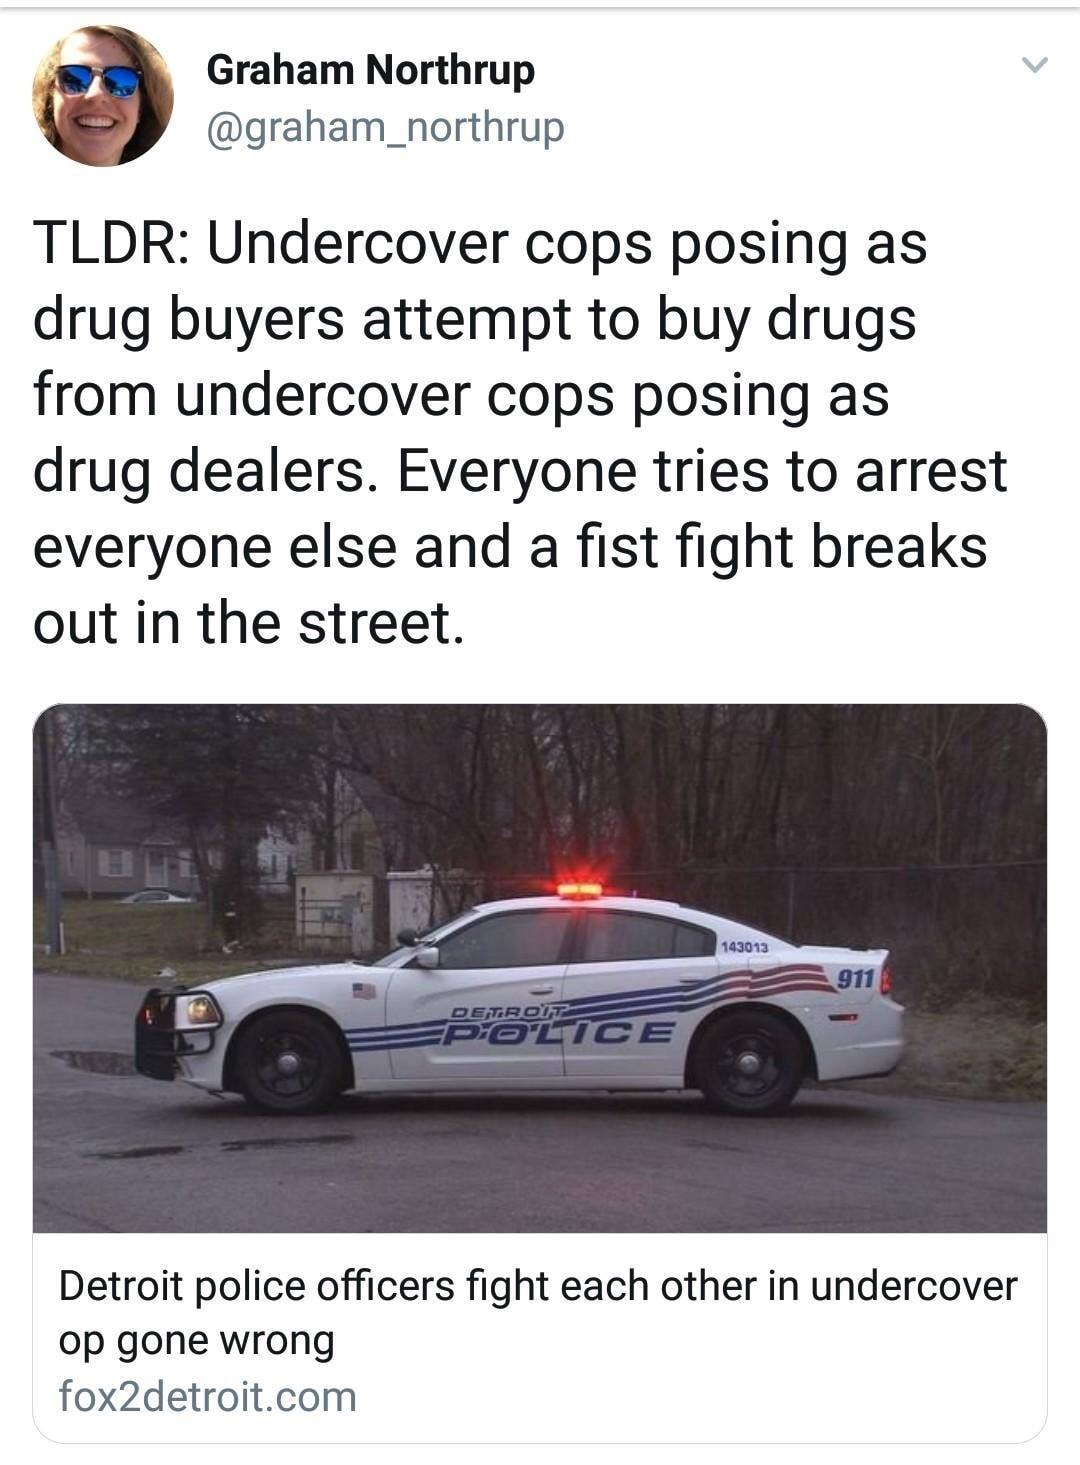 funny memes pic of undercover cop meme - Graham Northrup Tldr Undercover cops posing as drug buyers attempt to buy drugs from undercover cops posing as drug dealers. Everyone tries to arrest everyone else and a fist fight breaks out in the street. 143013 